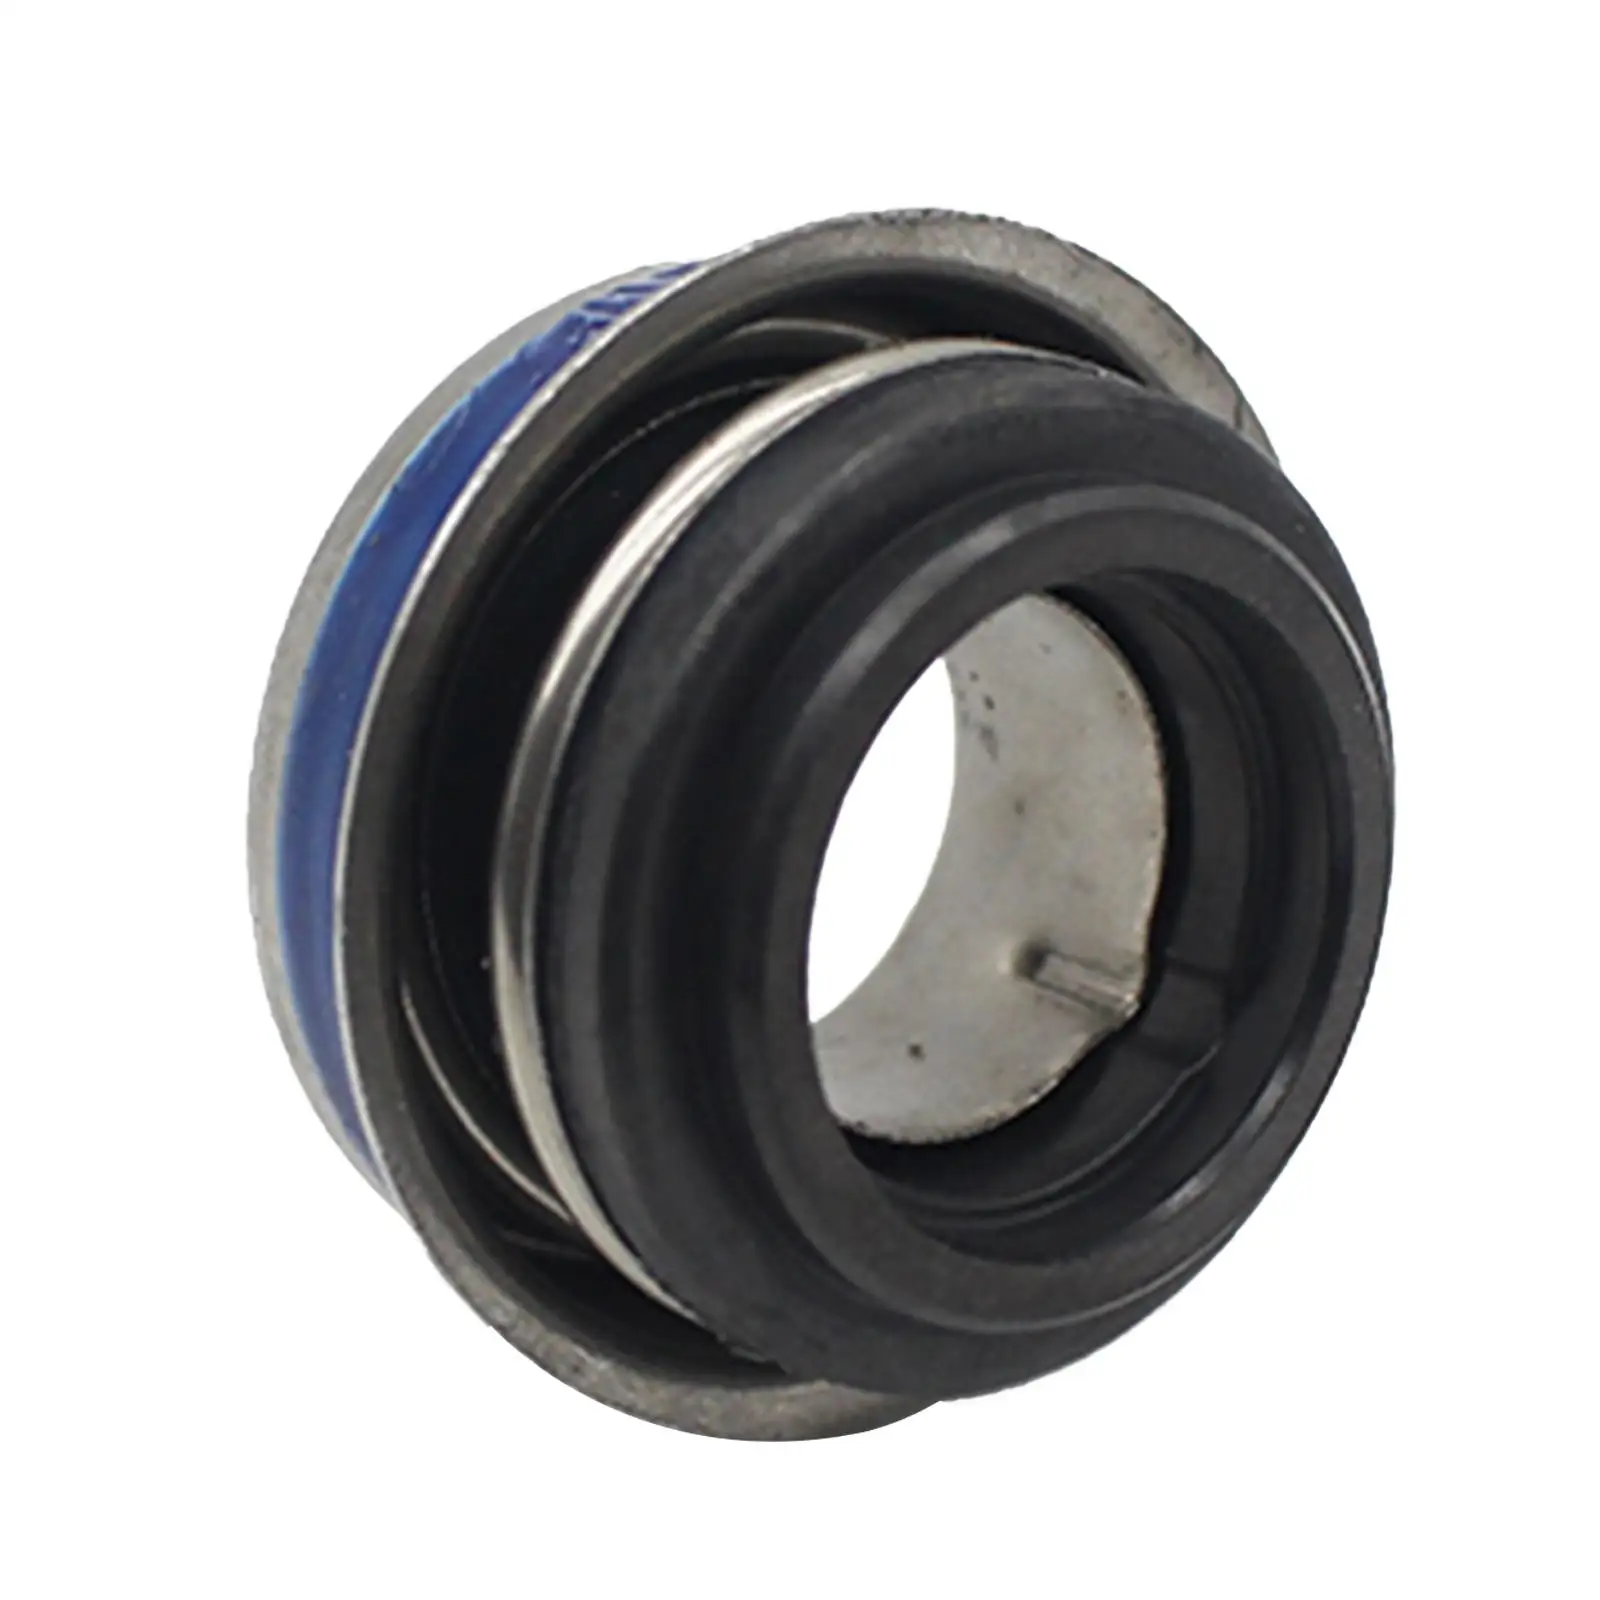 Motorcycle Water Pump Oil Seals Fit for Yamaha XP500 Tmax Tdm850 Direct Replaces Easy to Install Durable High Performance